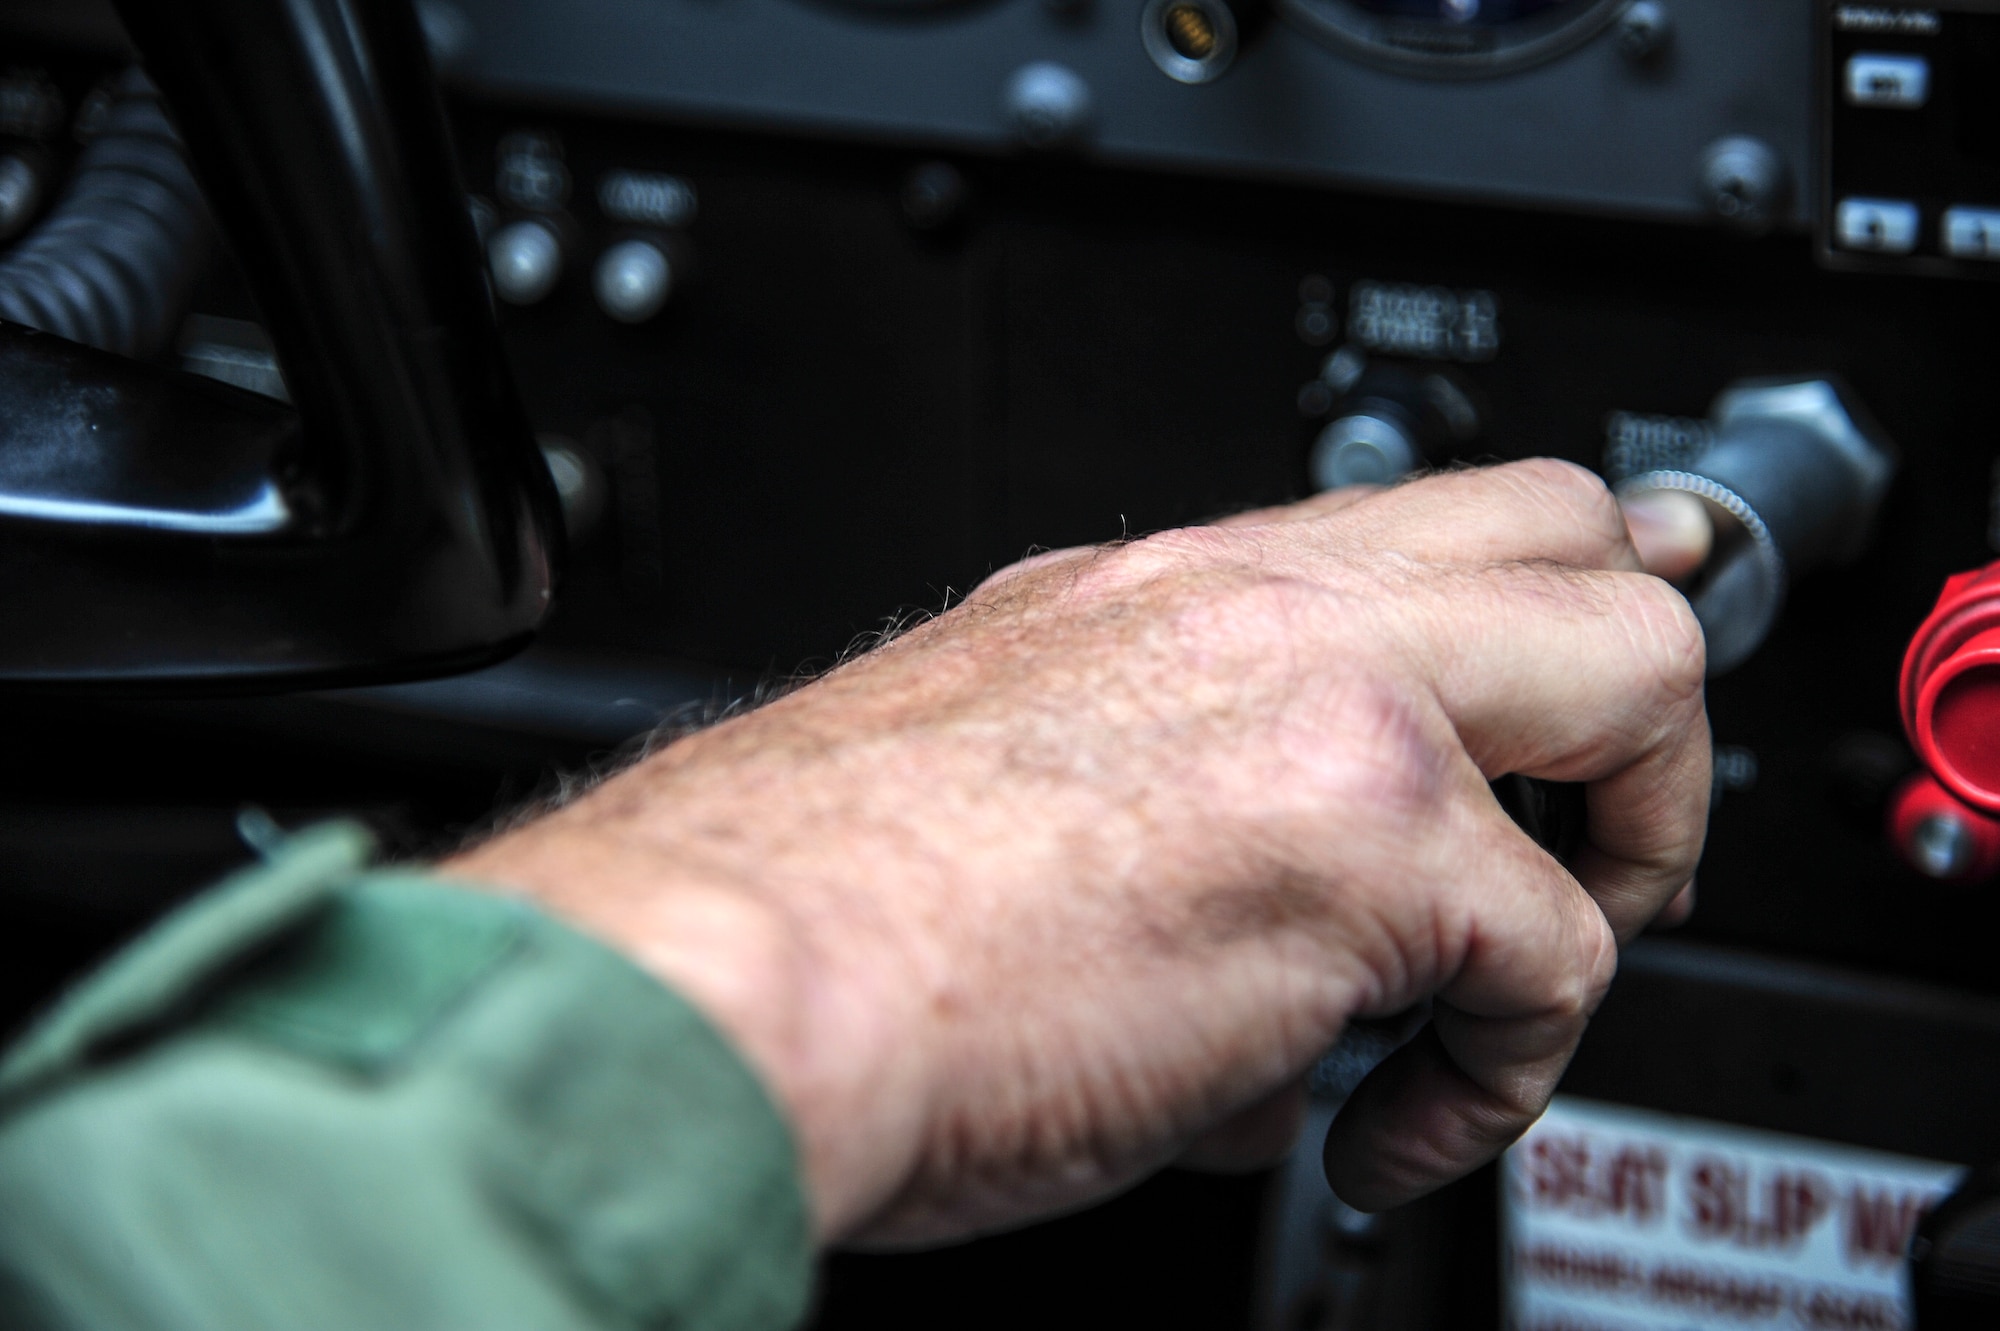 Mark Biron, Civil Air Patrol 71st Composite Squadron member, controls the throttle of a CAP Cessna 172 during a RED FLAG-Alaska 13-3 sortie Aug. 19, 2013. Eielson Air Force Base, Alaska, hosts the 71st CS, which participates in various exercises such as RF-A to assist participating units. (U.S. Air Force photo by Senior Airman Zachary Perras/Released)